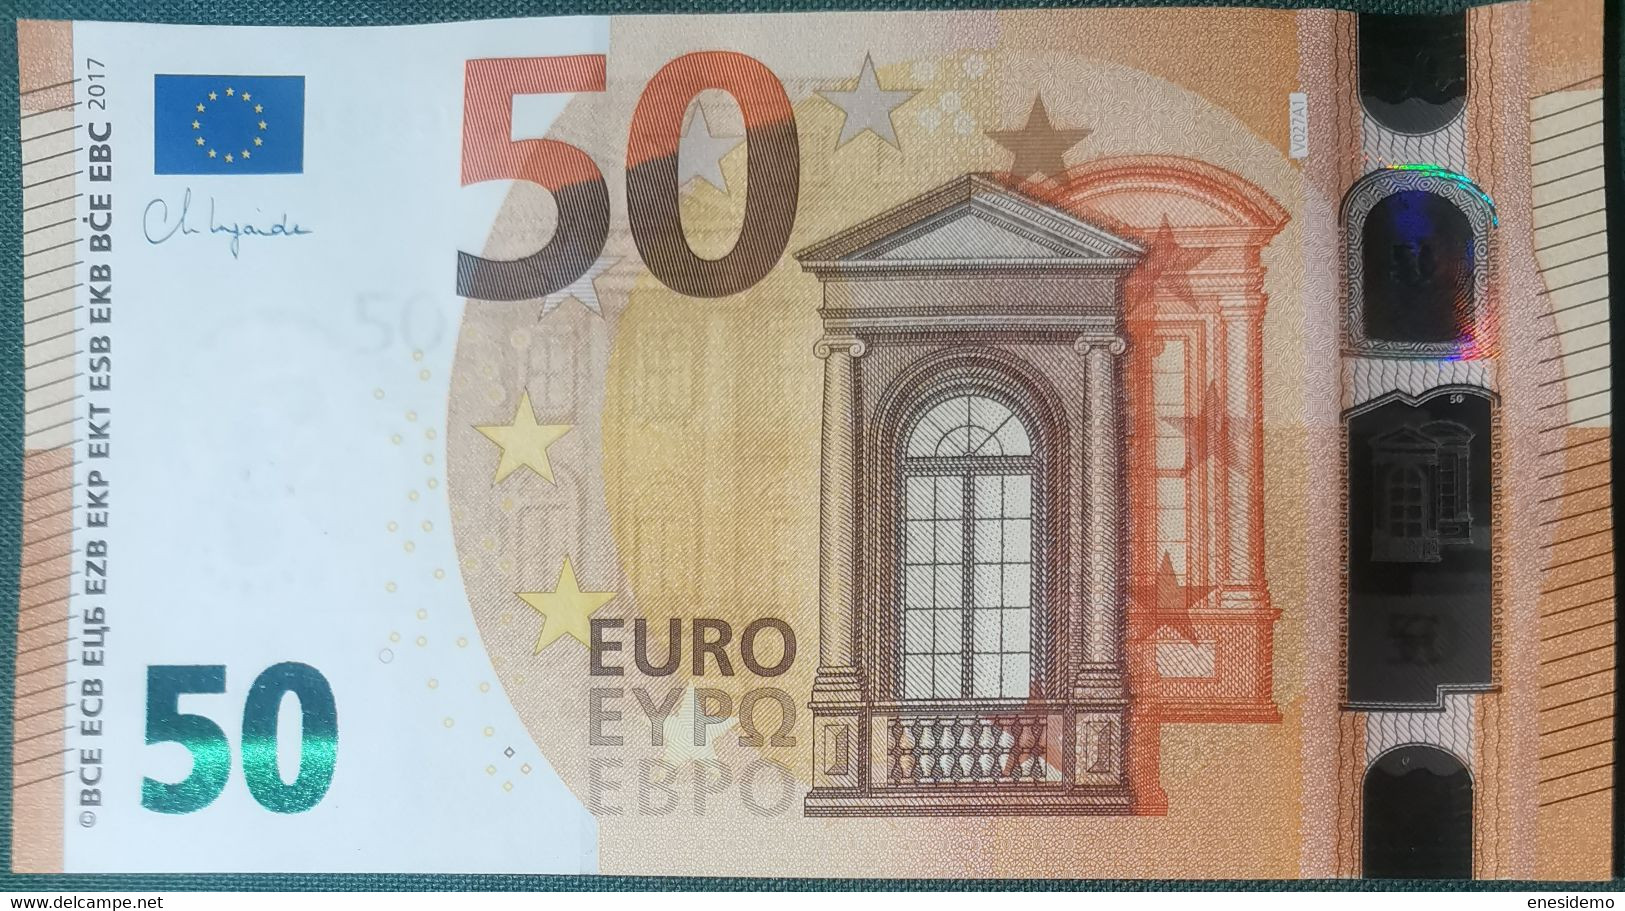 50 EURO SPAIN 2017 LAGARDE V027A1 VC SC FDS UNC. FIRST POSITION PERFECT - 50 Euro